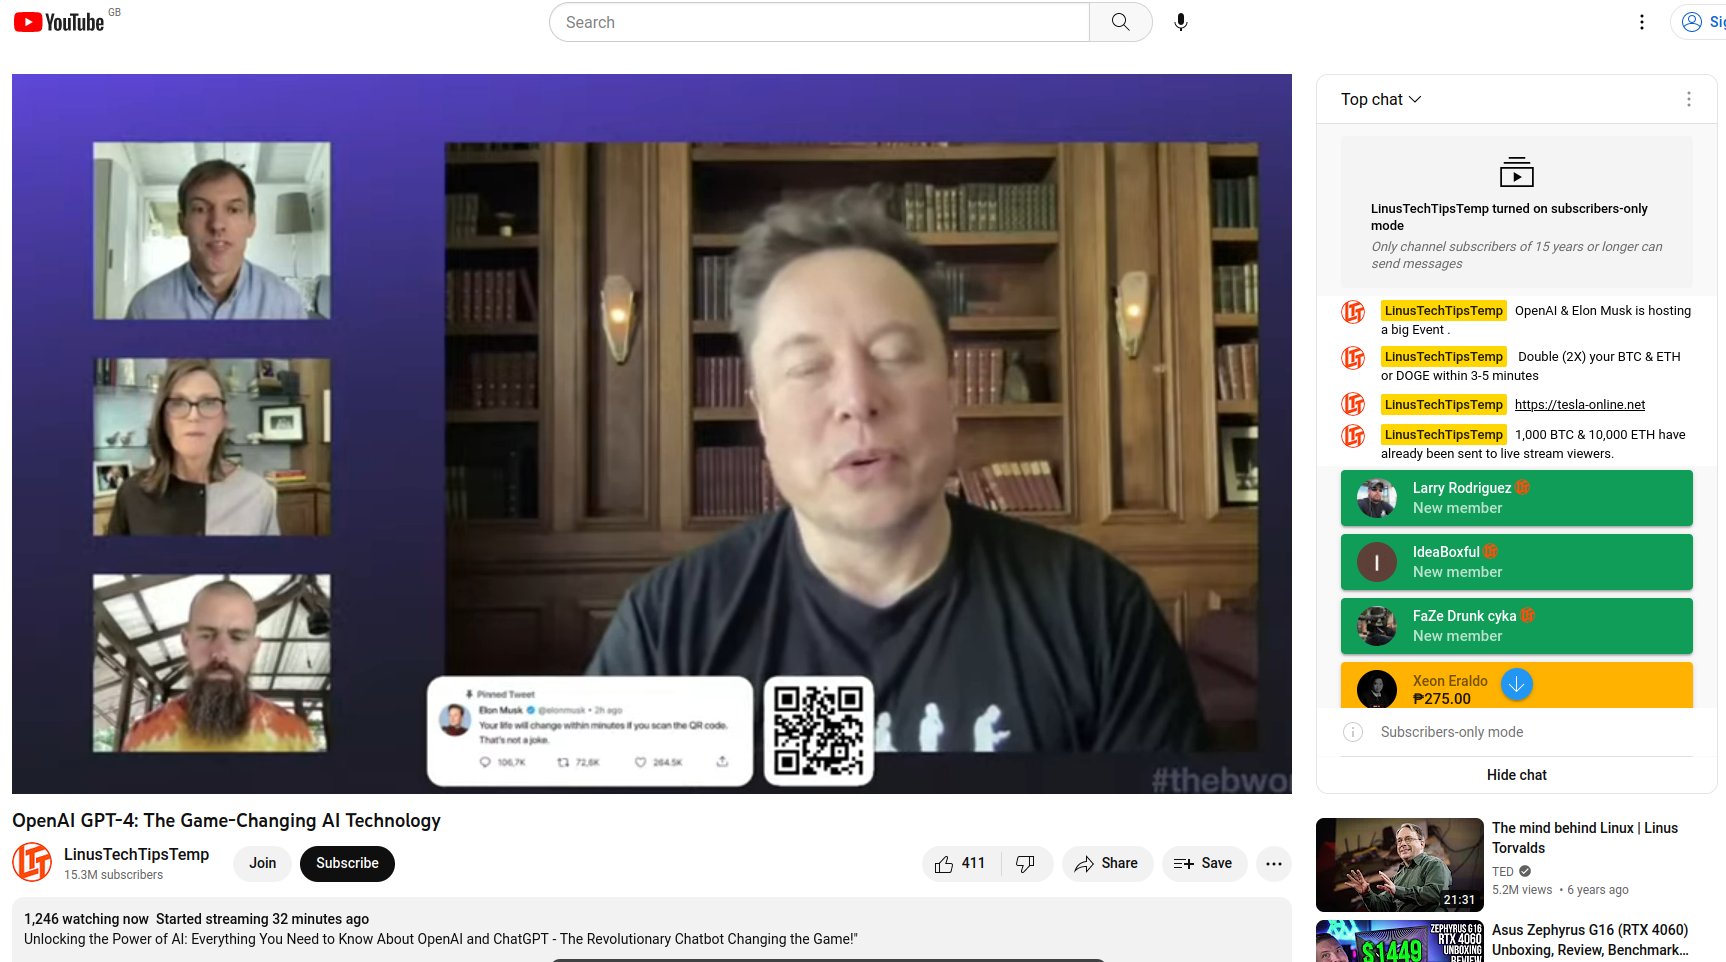 Screenshot while the attack was active showing the URL of the scam being promoted in live chat and via QR code.  At this point, the channel name was changed to LinusTechTipsTemp.